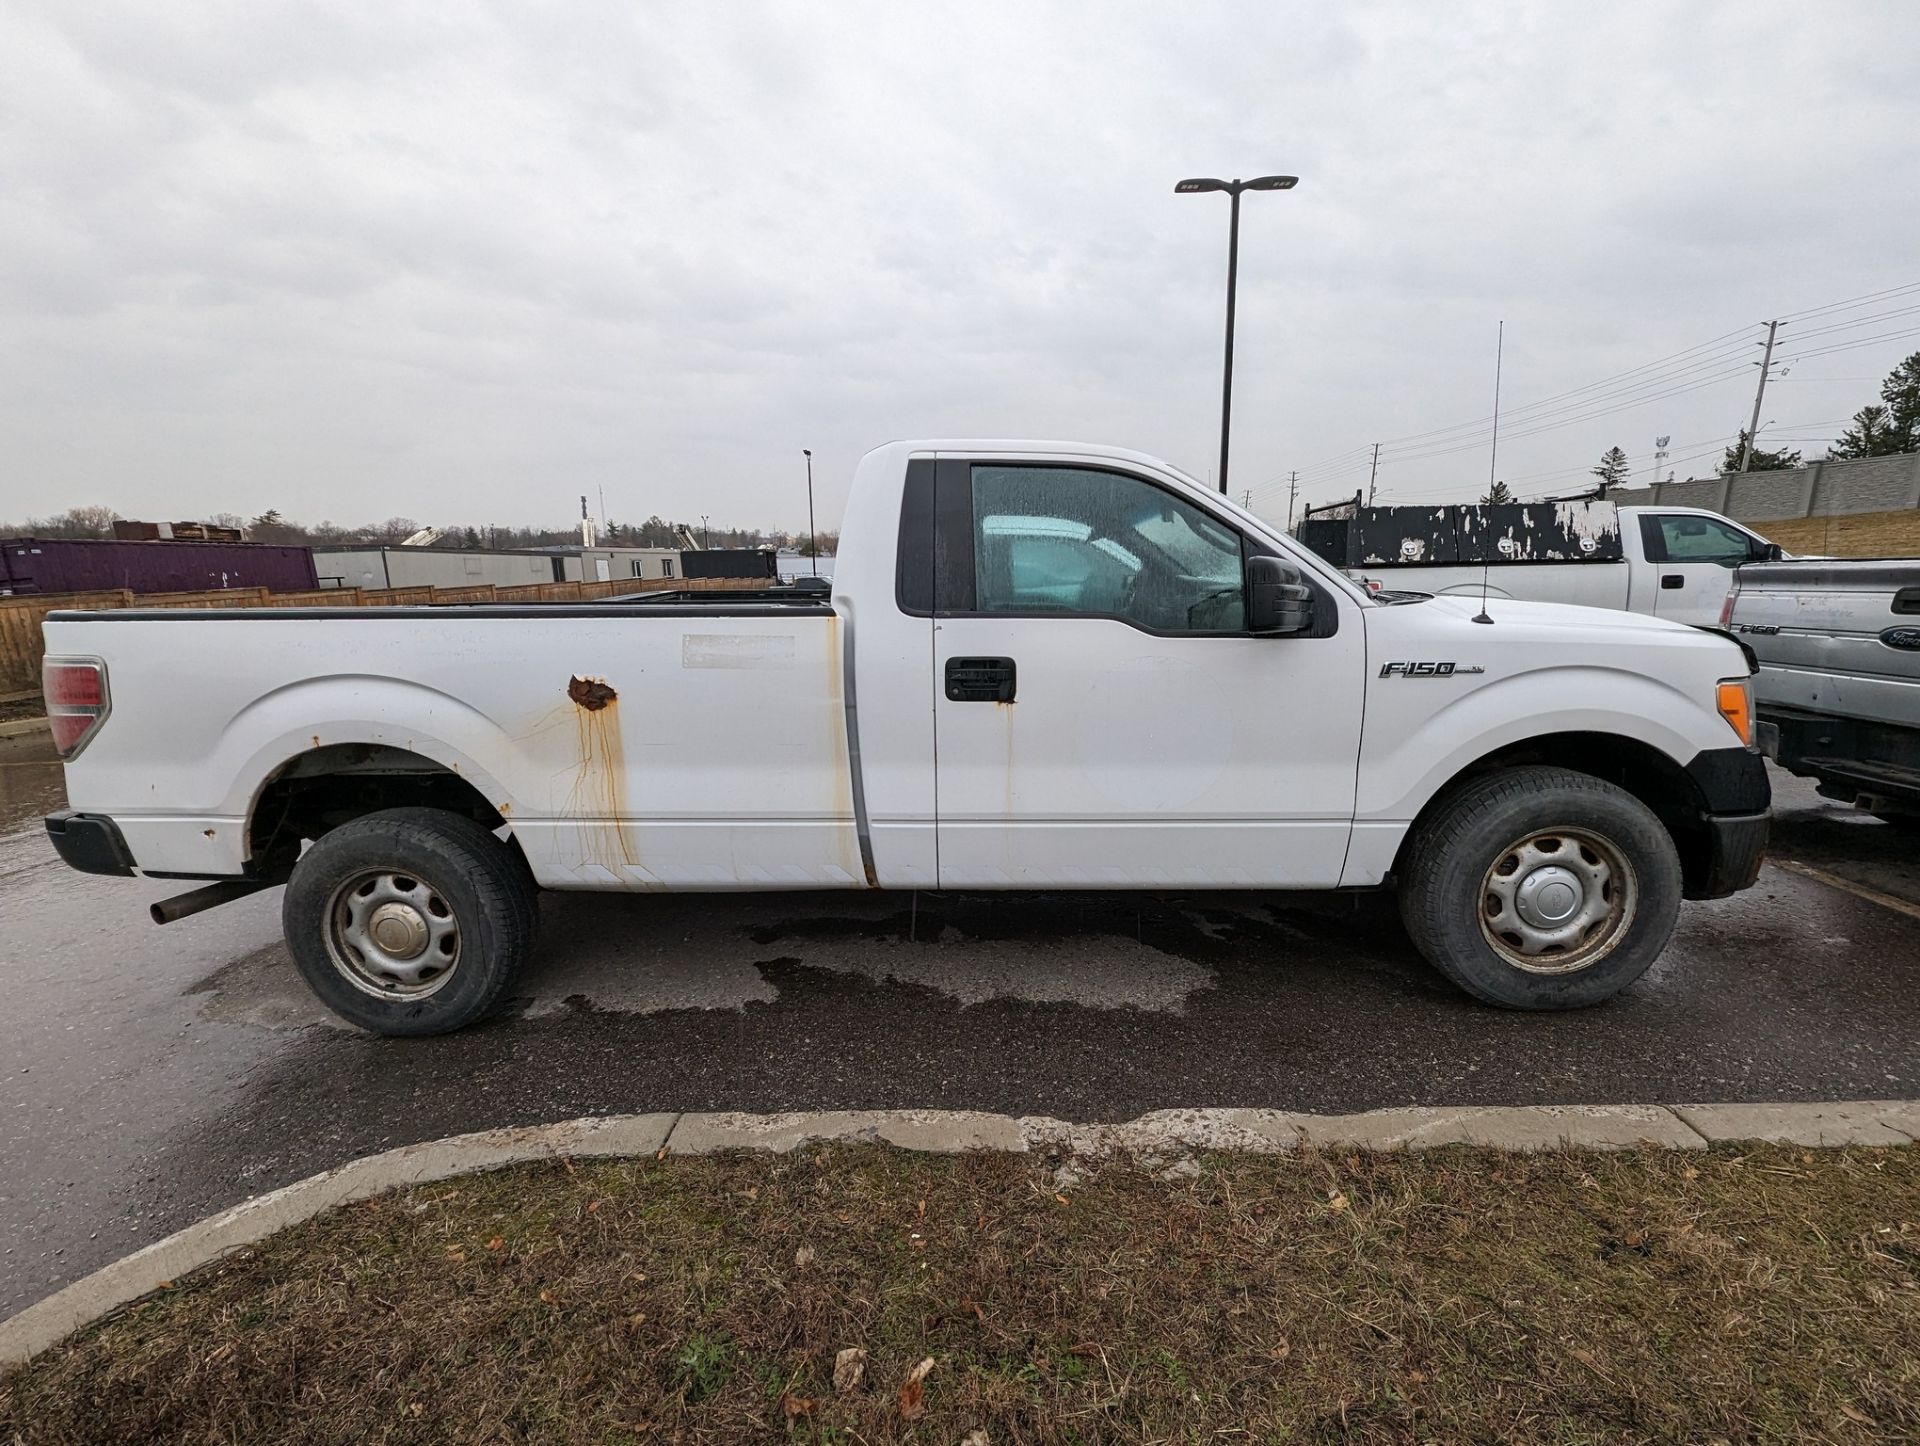 2014 FORD F150 XL PICKUP TRUCK, VIN# 1FTNF1CF7EKD87989, APPROX. 345,777KMS (NO BLACK TOOL BOXES) - Image 2 of 9